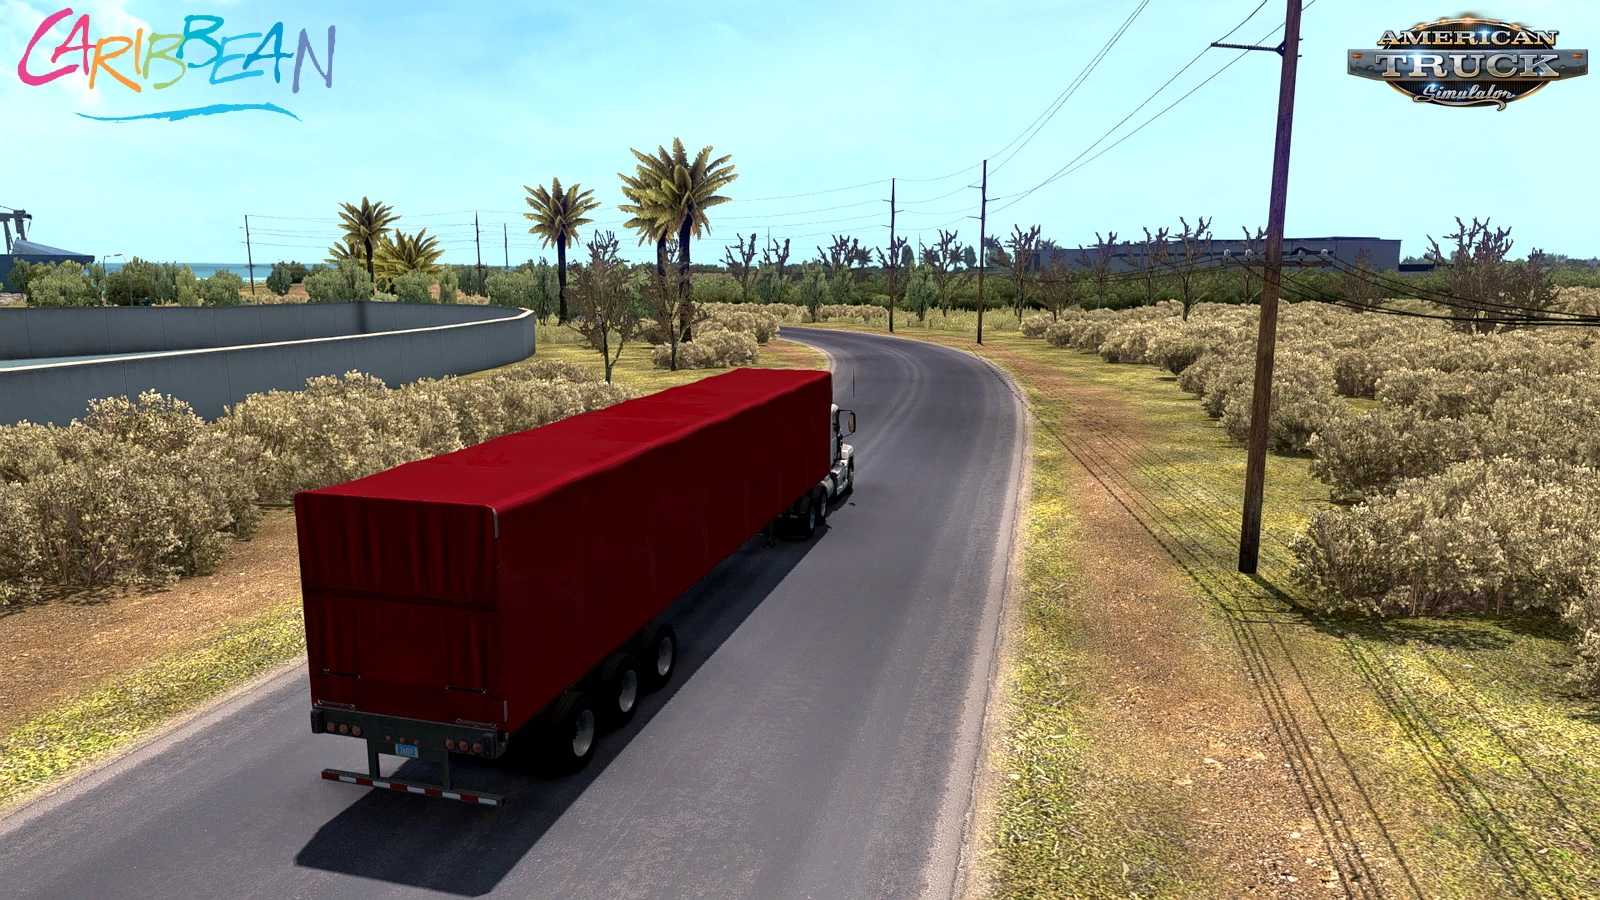 Caribbean Map v1.2.2 by TerraMaps (1.44.x) for ATS